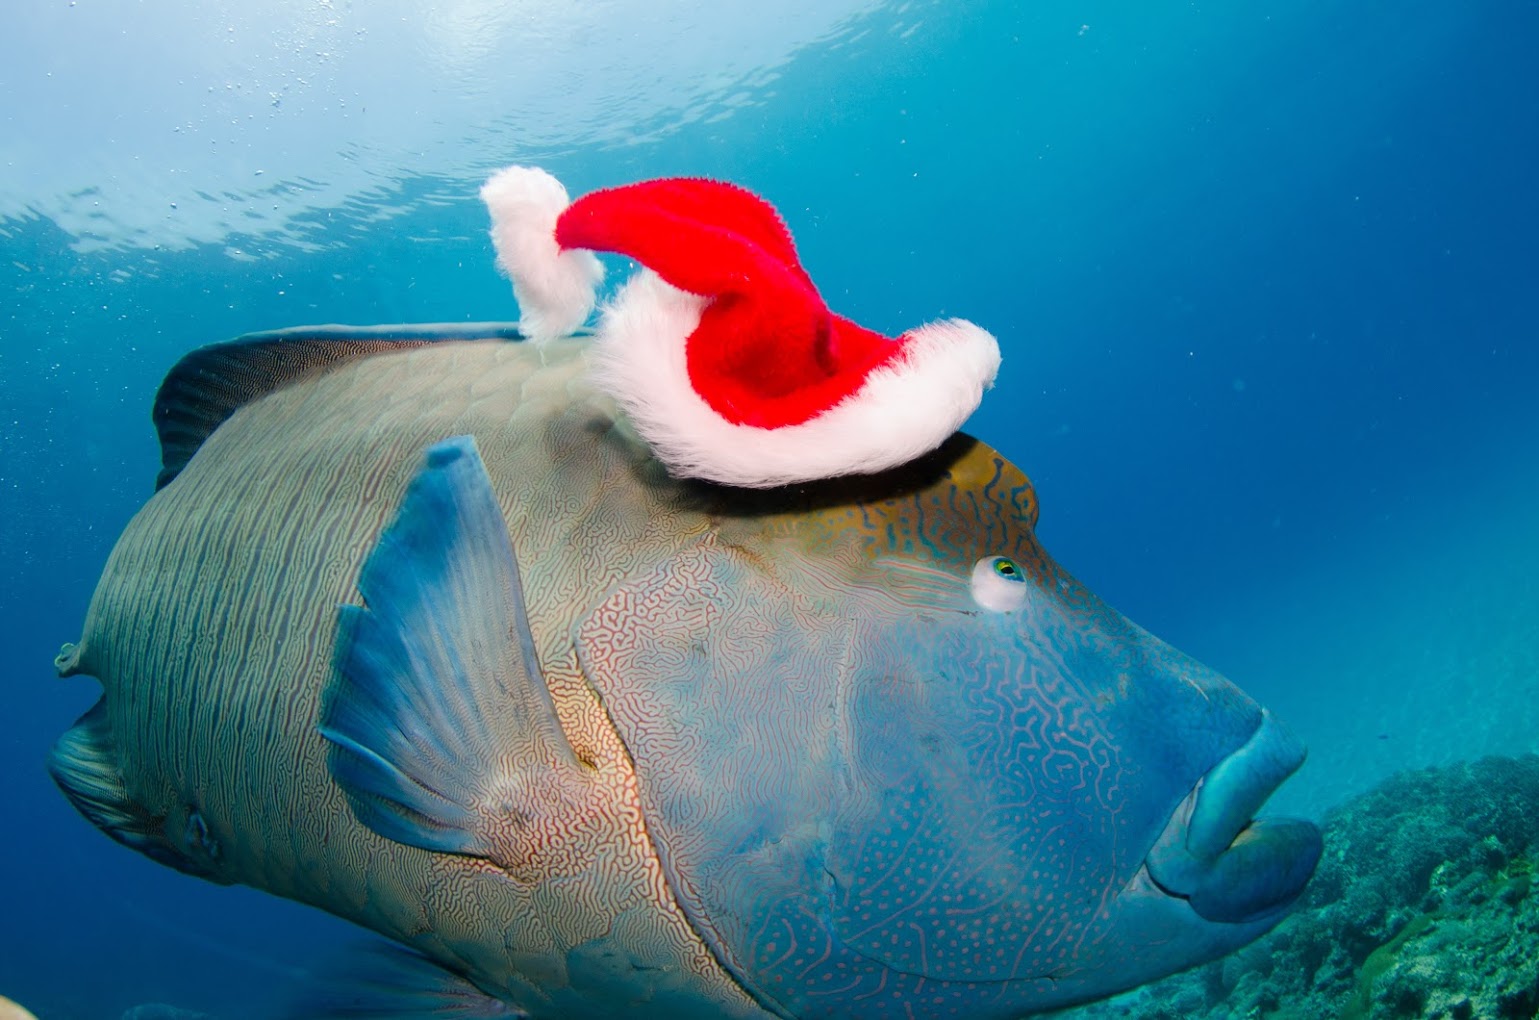 Christmas on the Great Barrier Reef - This one really wanted my red hat